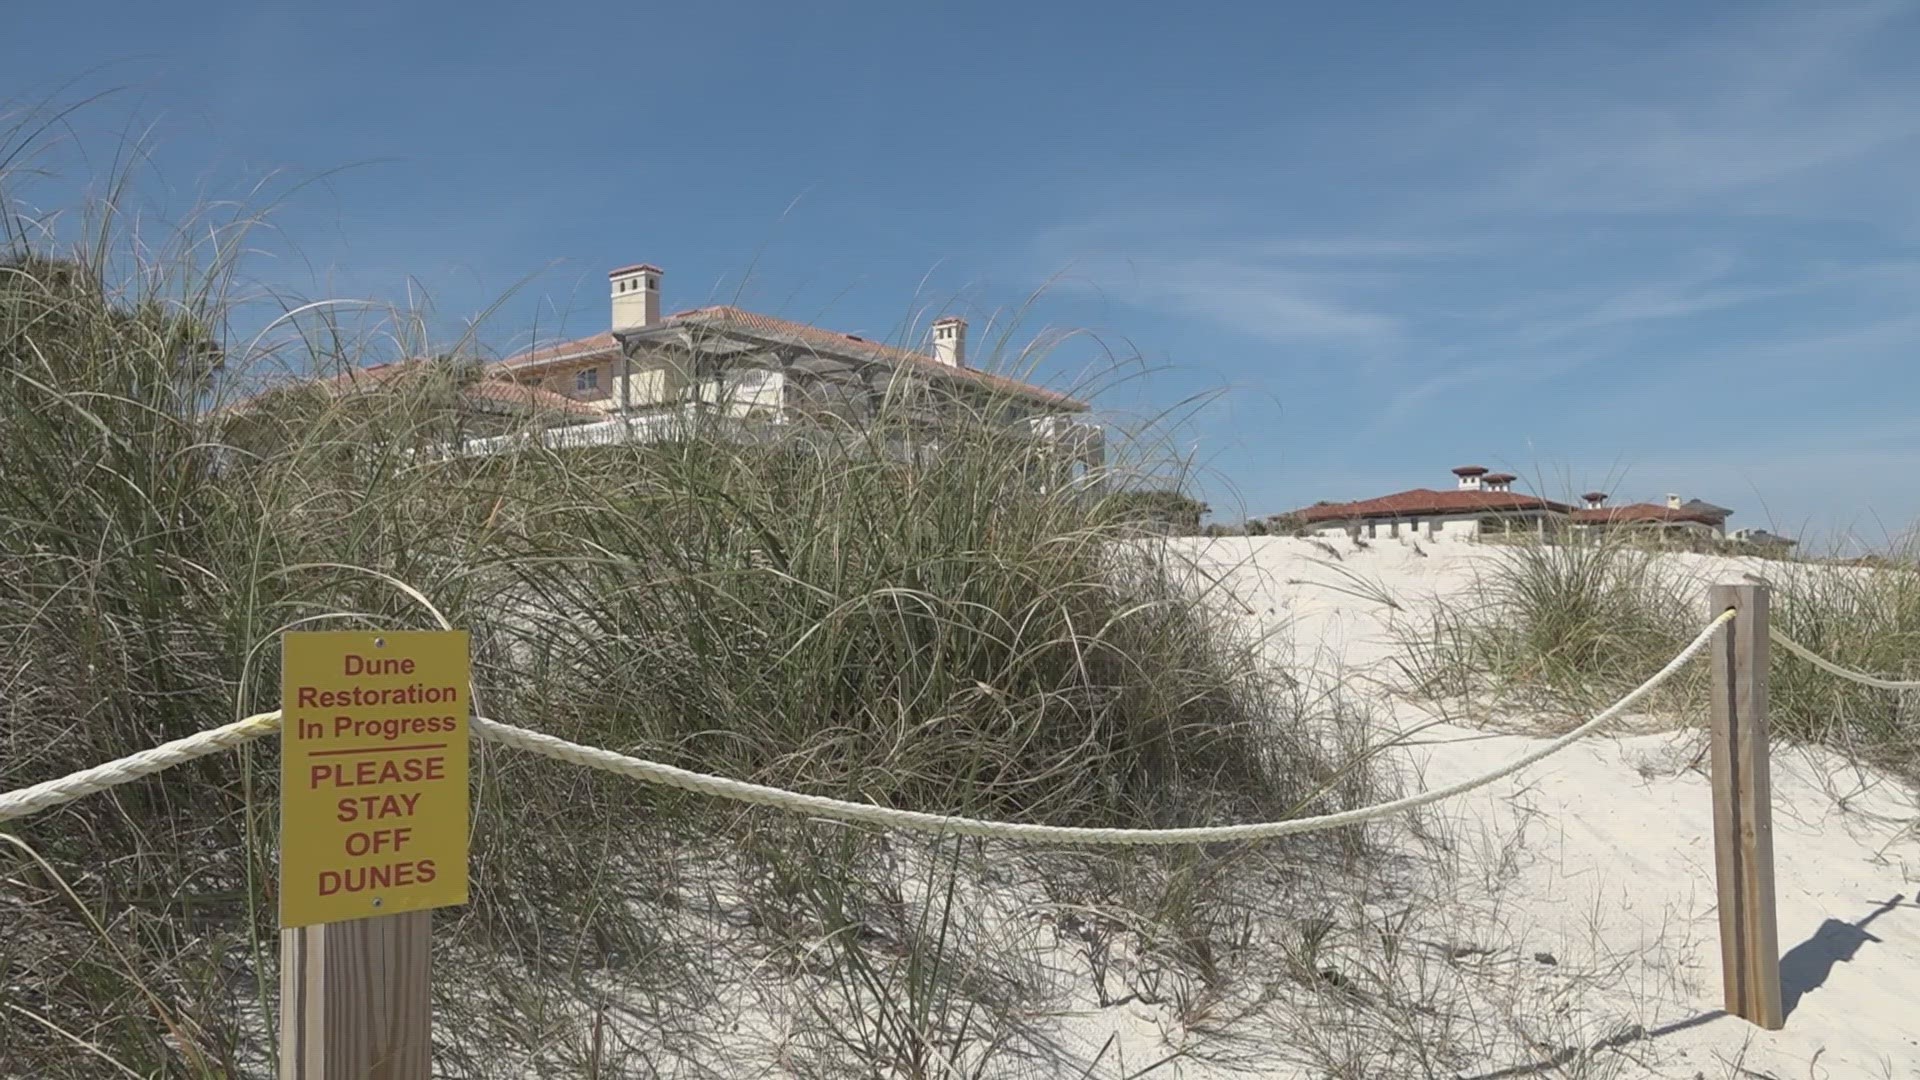 Mickler's Landing Beachfront Park will be closed starting mid to late-March for the 'Ponte Vedra Beach Restoration Project' that costs nearly $40 million.